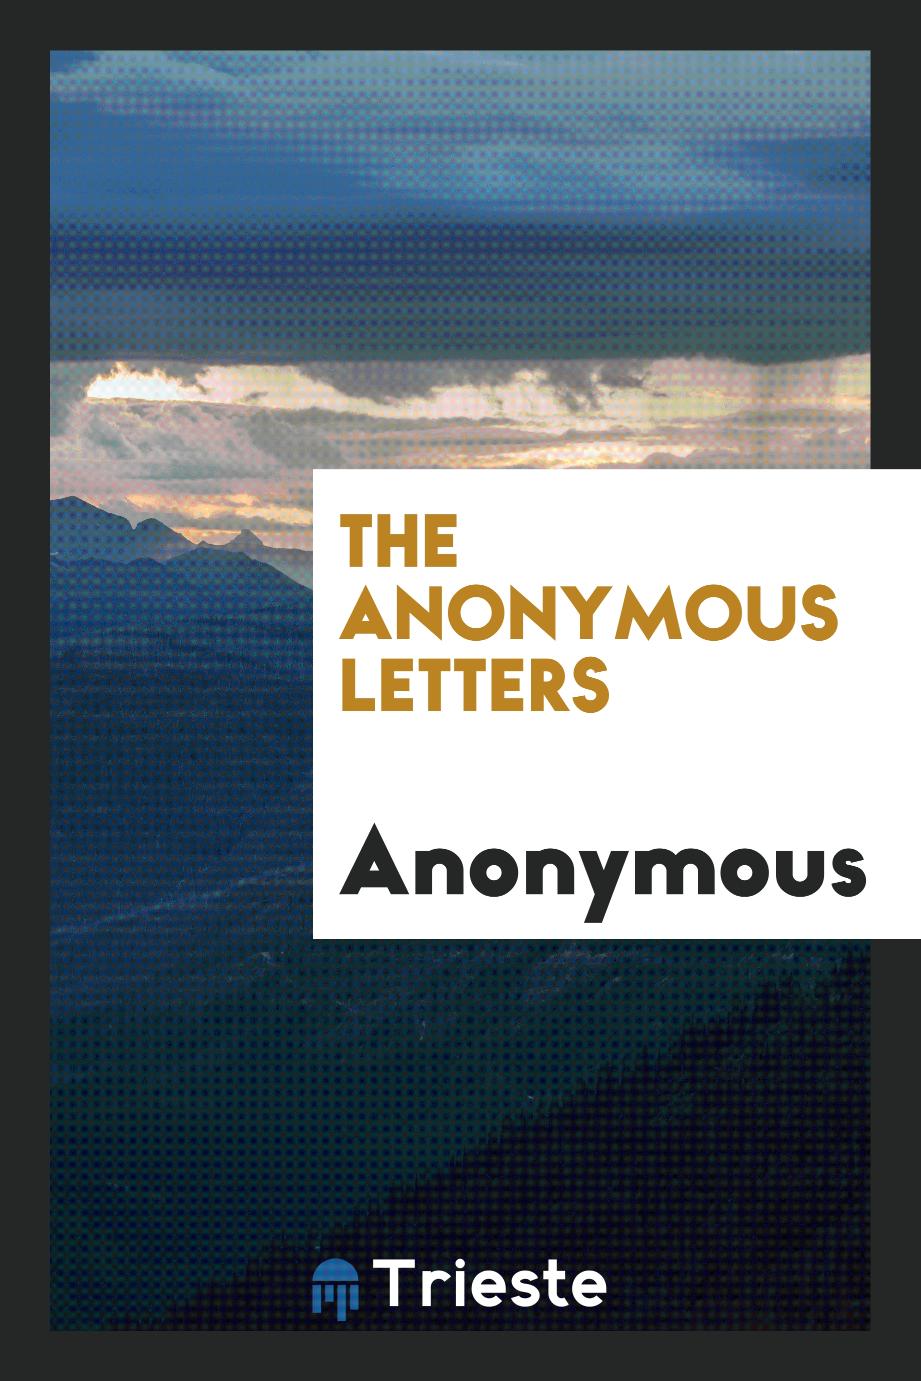 The anonymous letters